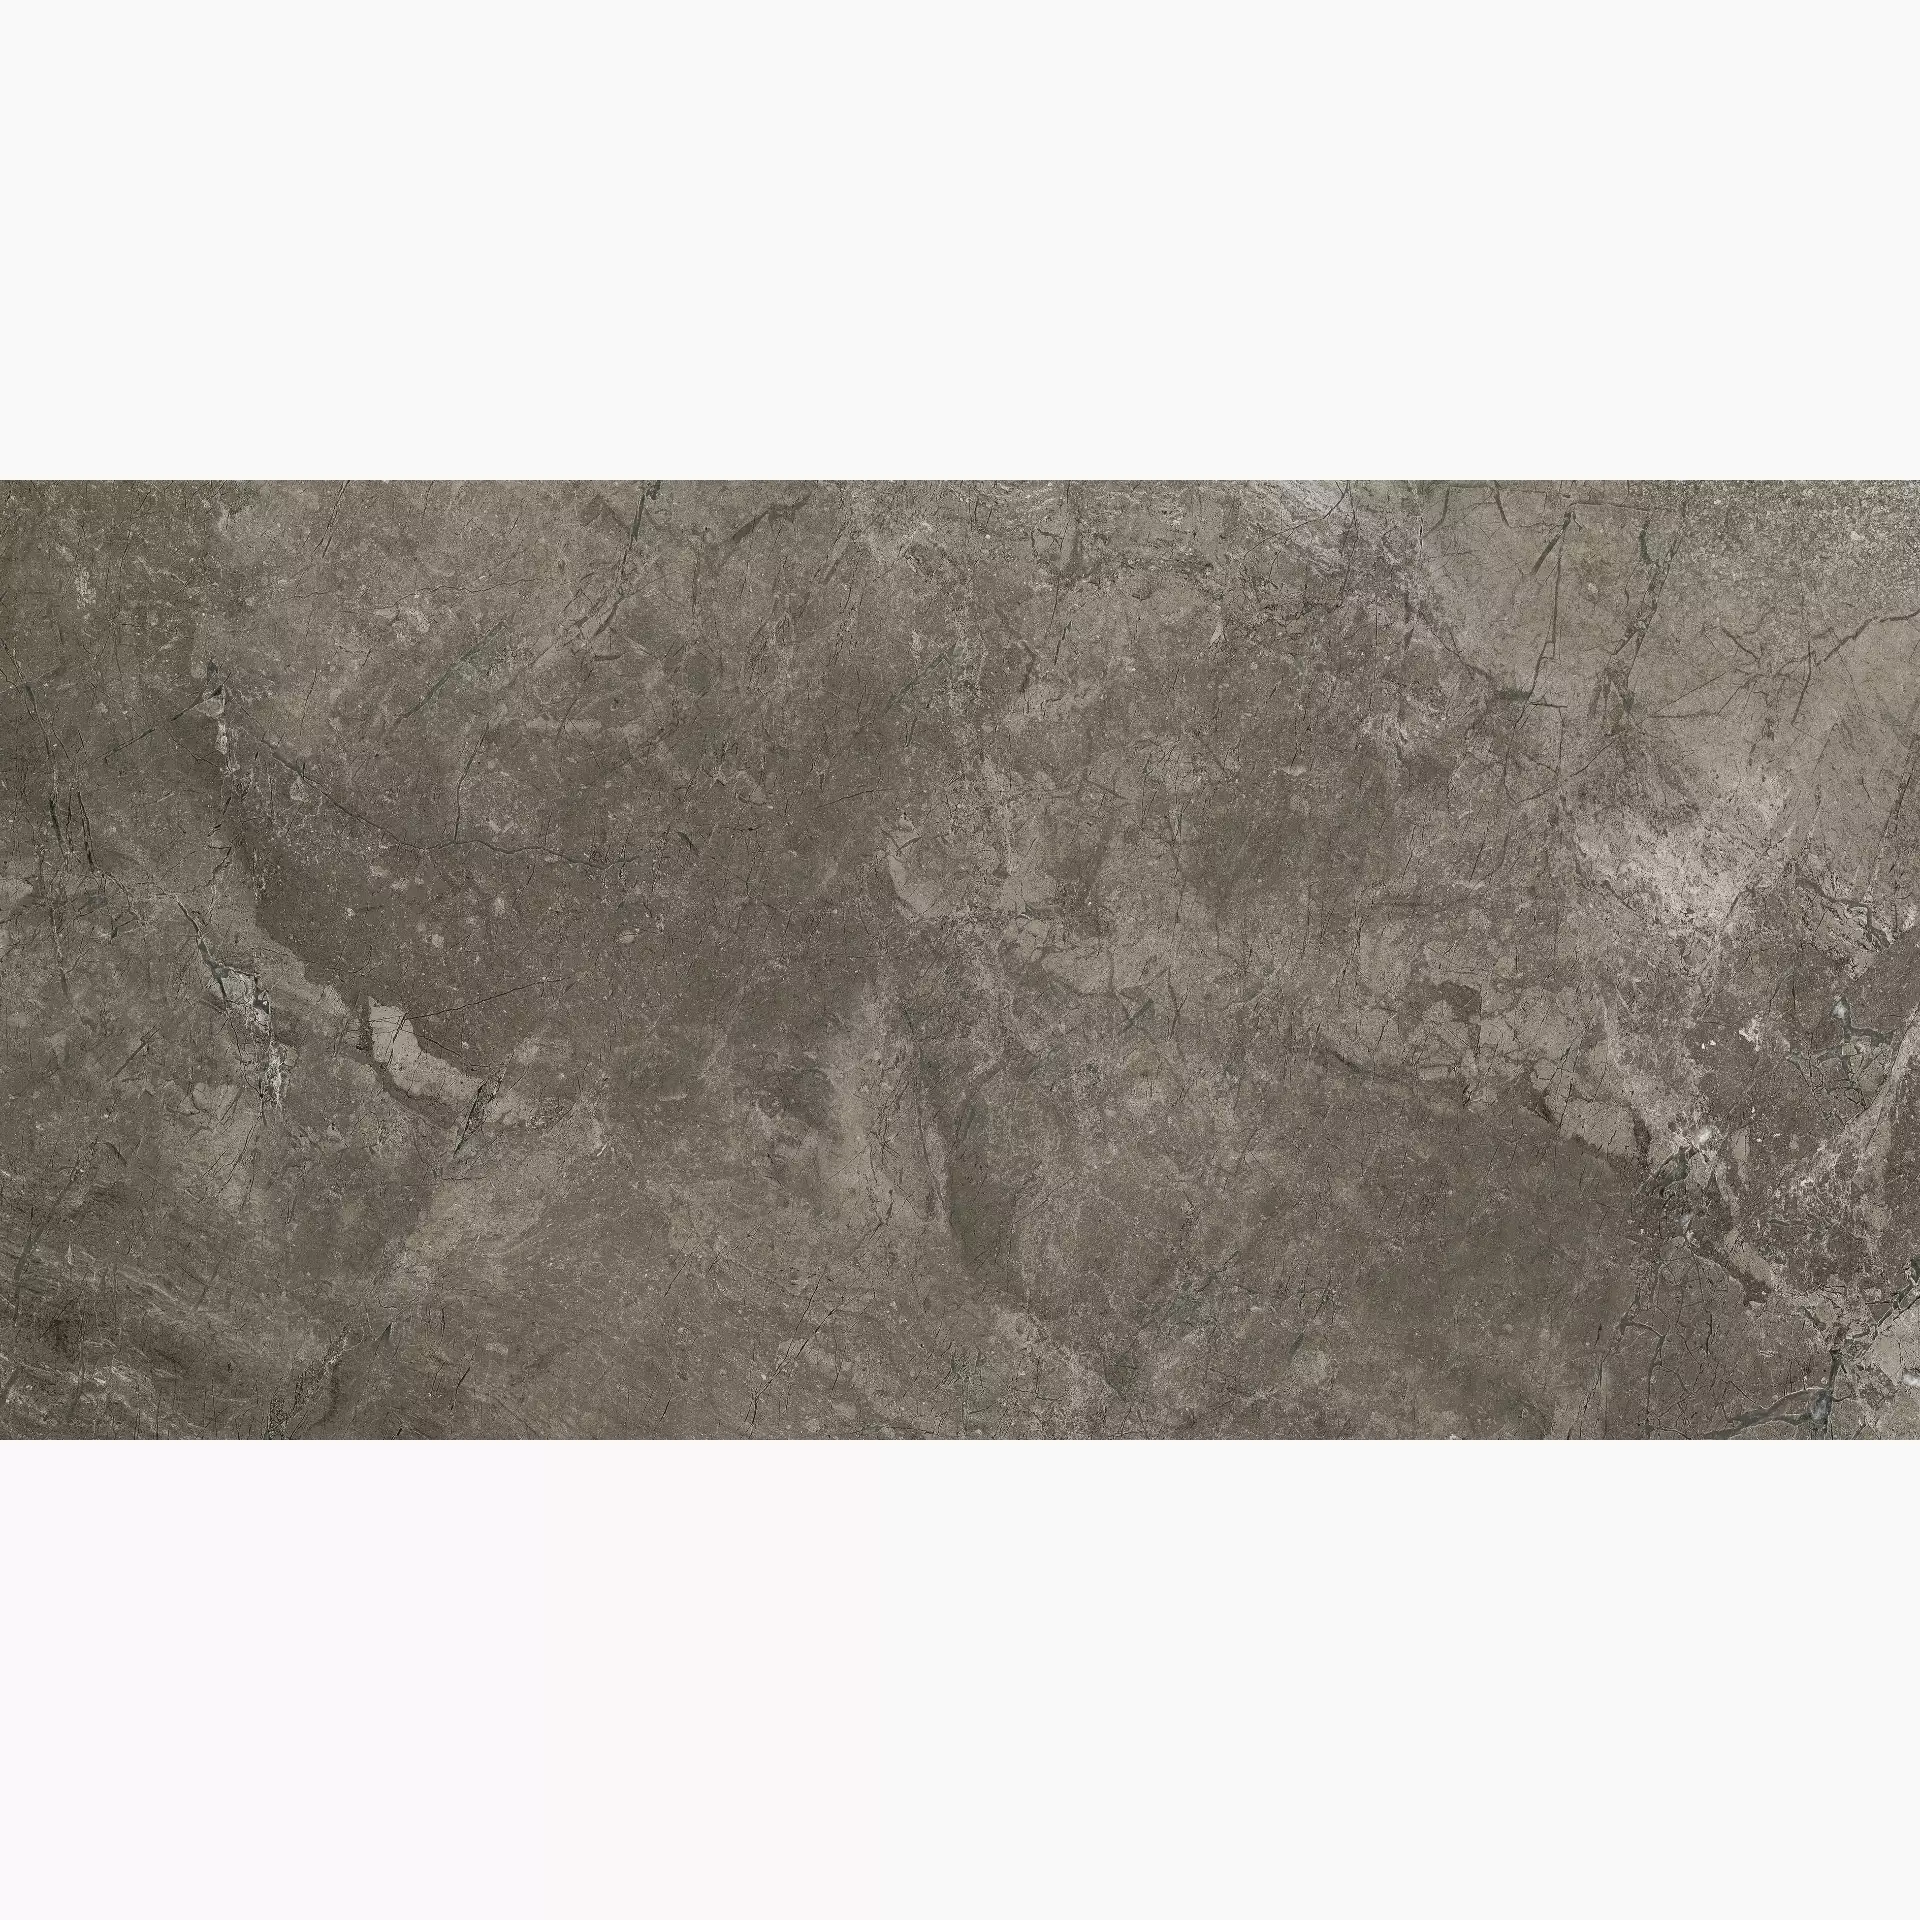 Refin River Natural Lucido OI39 60x120cm rectified 9mm